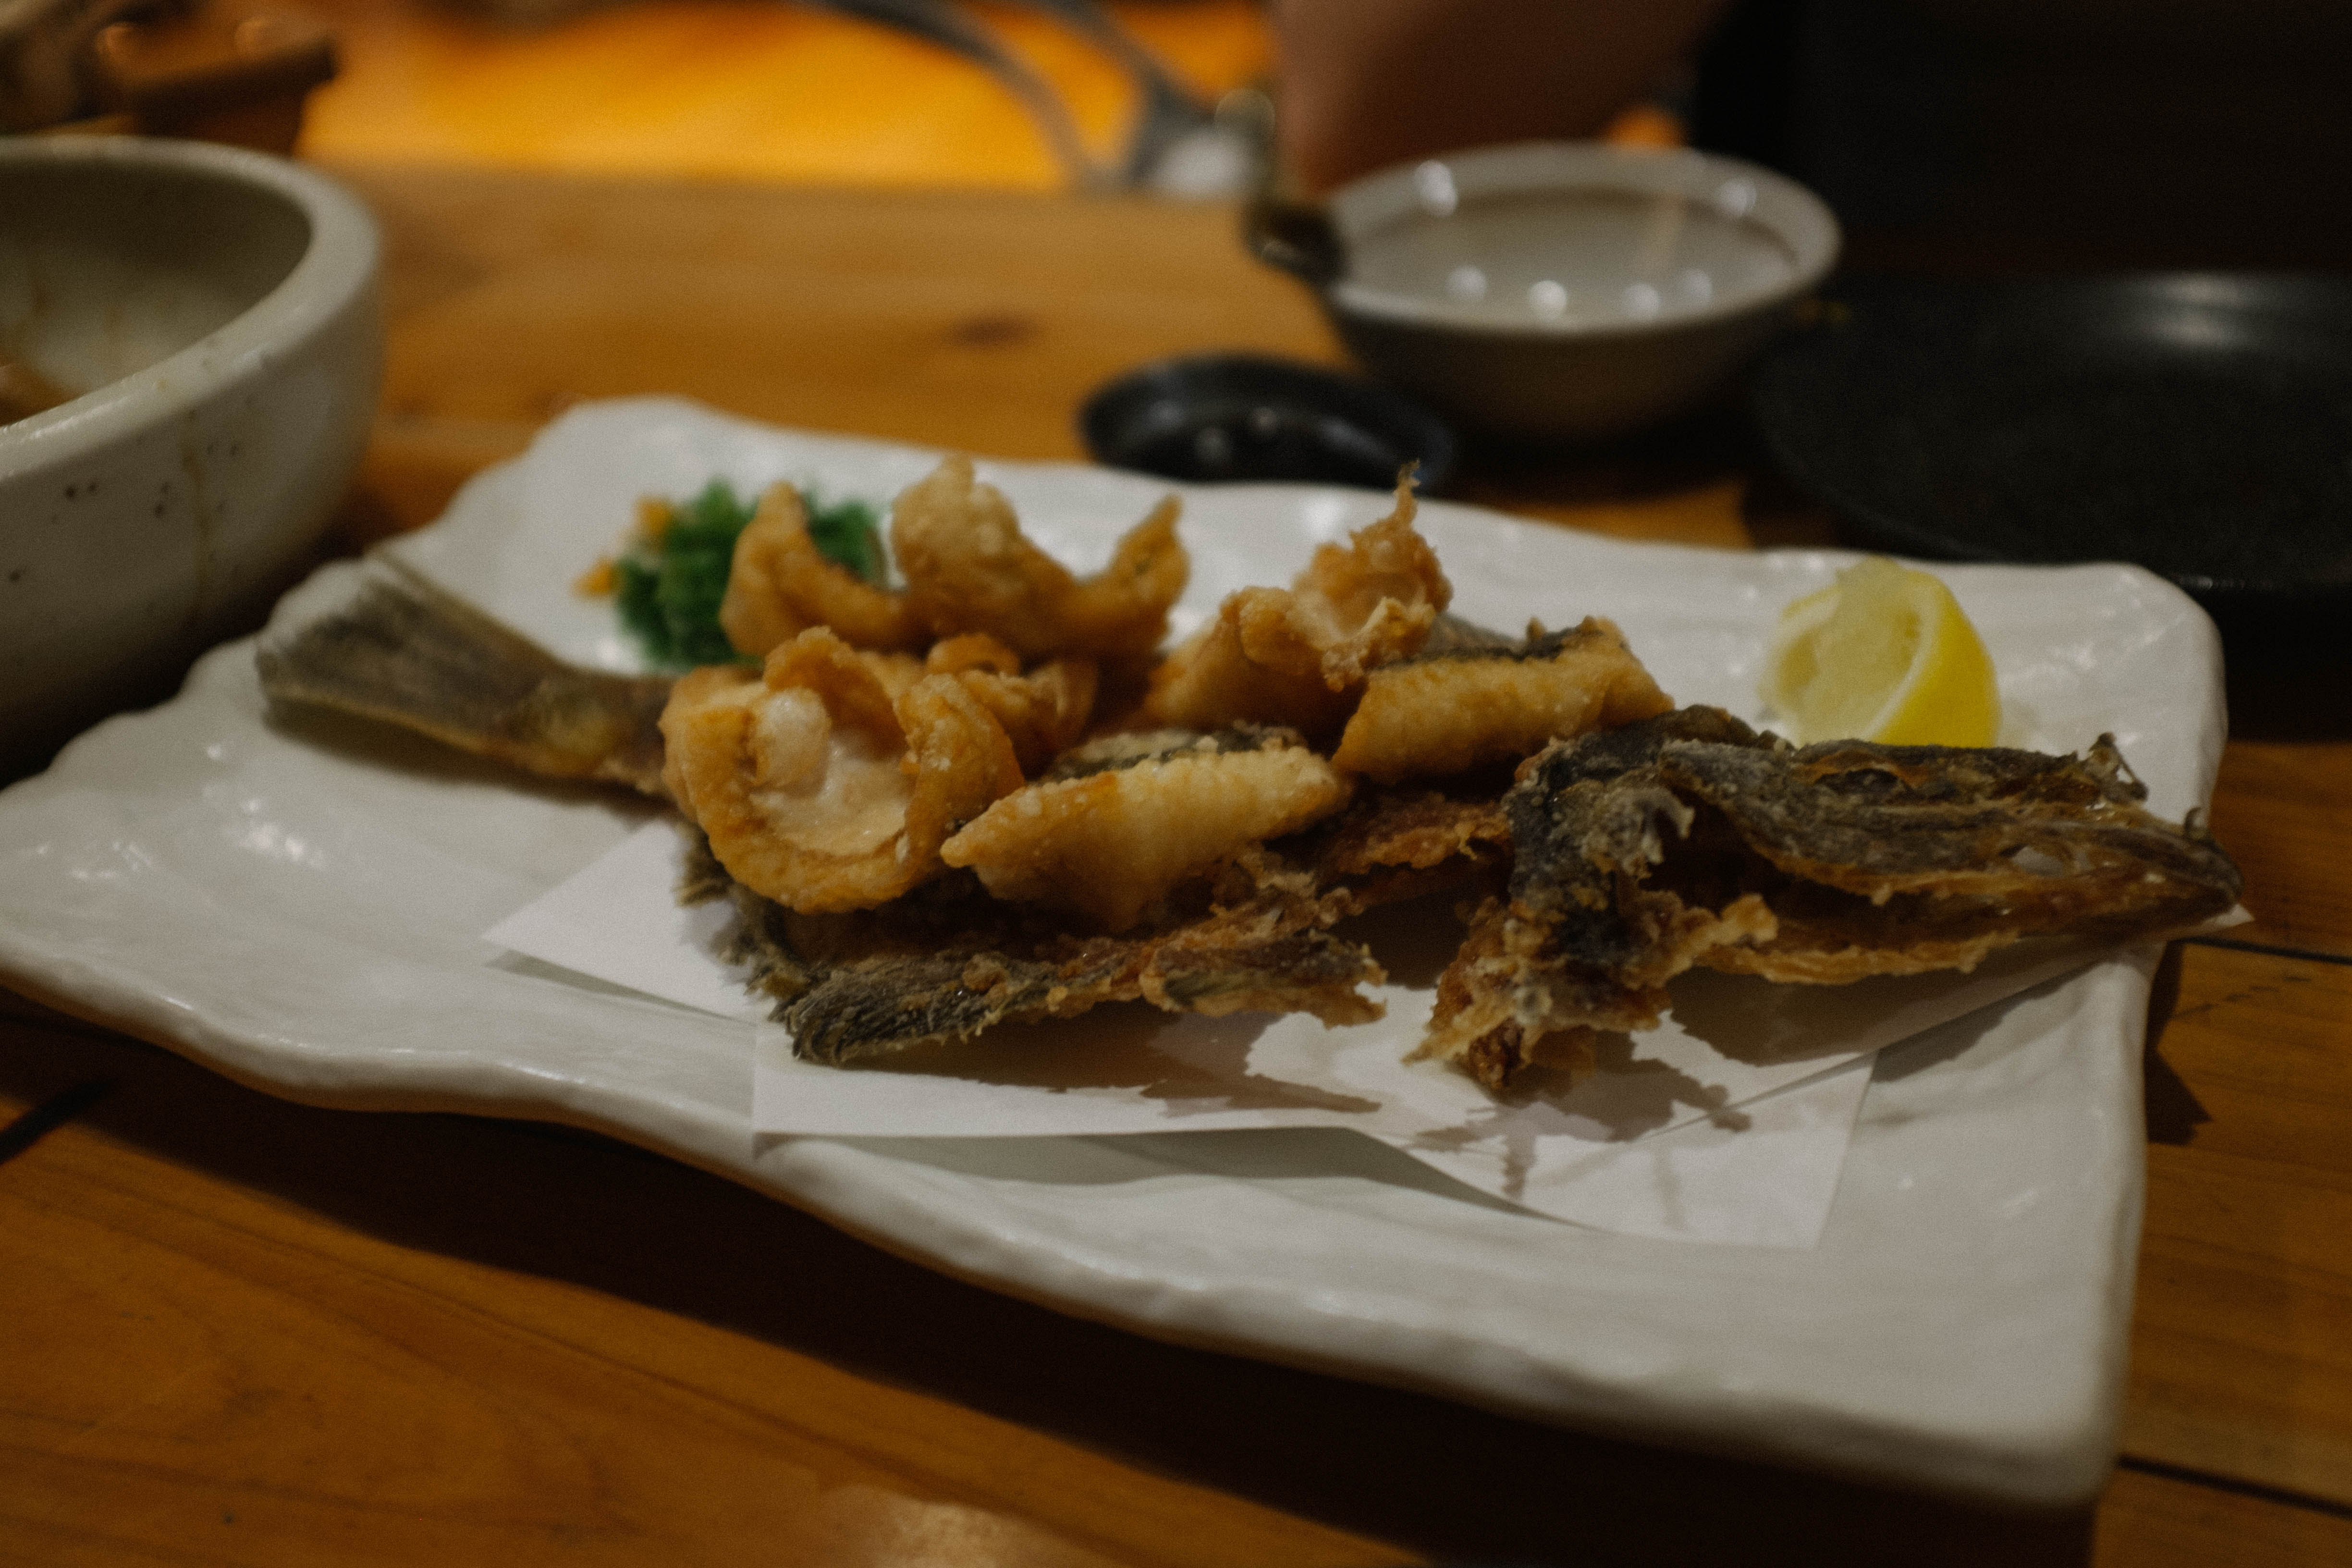 fried fish, where you could even eat the bones.